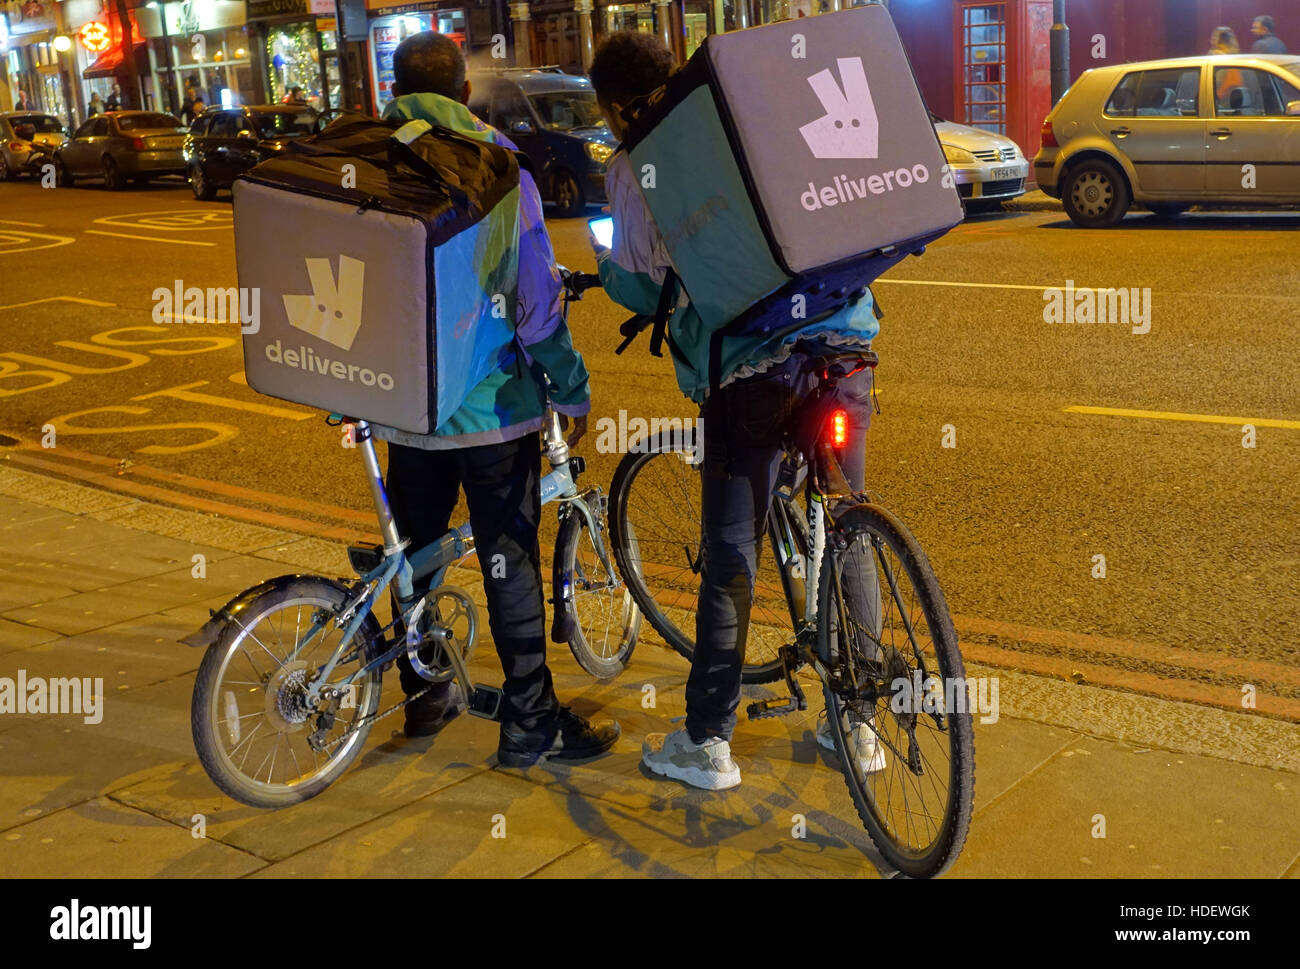 Deliveroo food delivery bicycle couriers in Islington, London Stock Photo